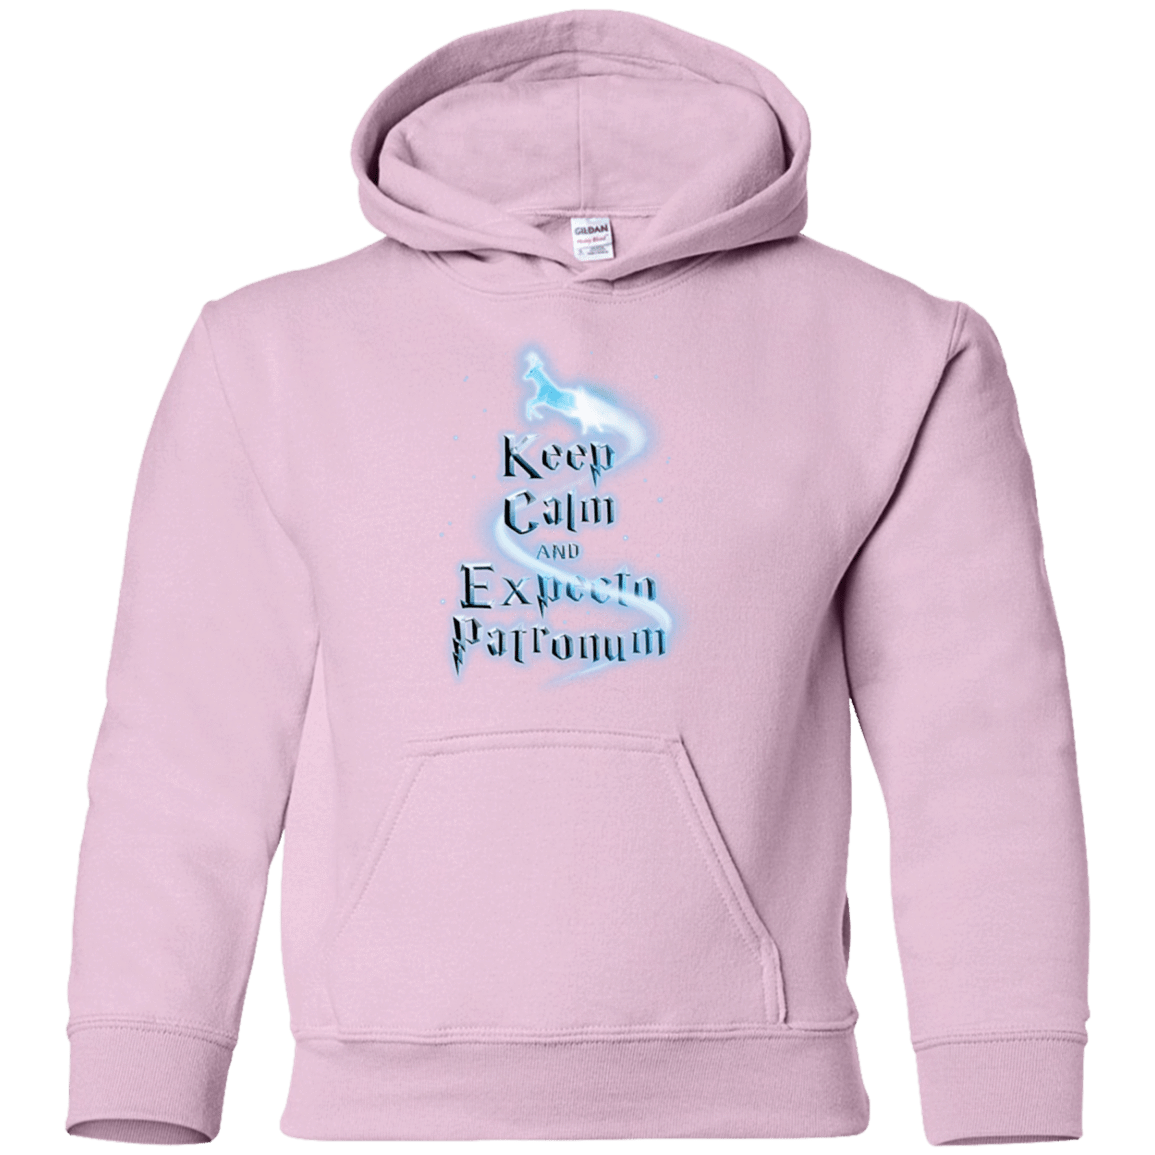 Sweatshirts Light Pink / YS Keep Calm and Expecto Patronum Youth Hoodie